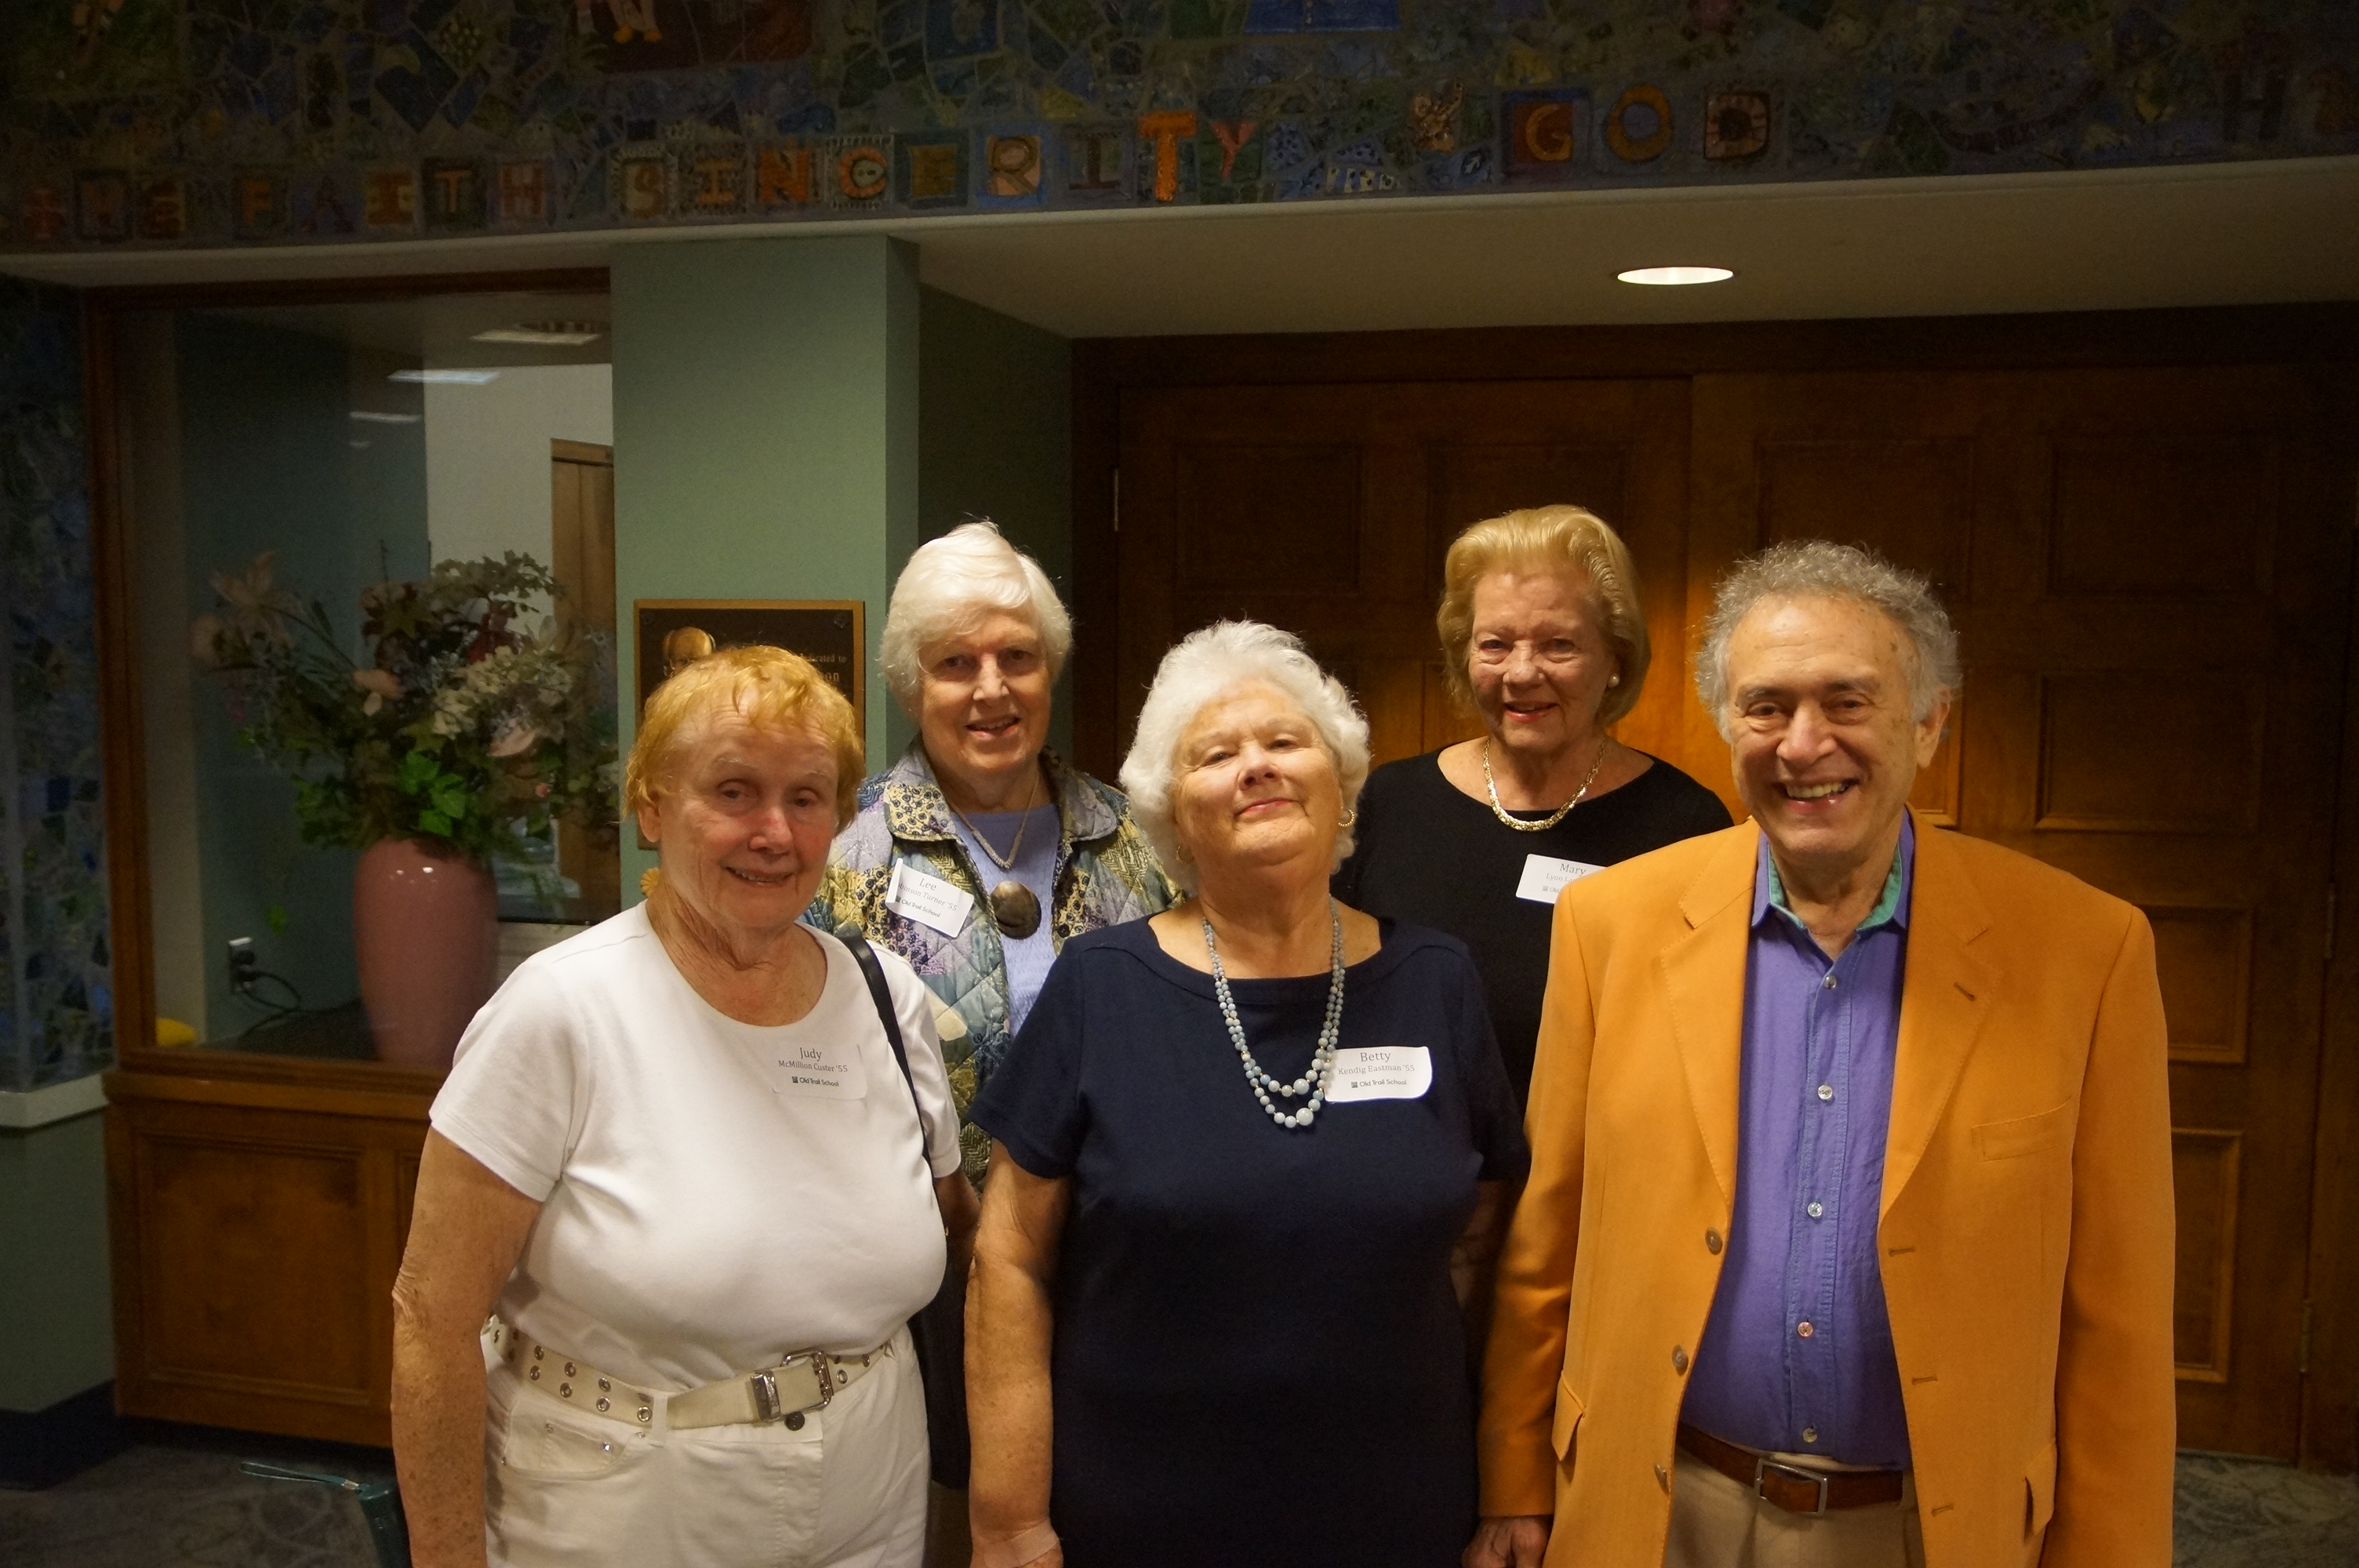 Class of 1955 - Back row (L-R): Lee Robinson Turner, Mary Laub and Front row (L-R): Judith McMillion Custer, Betty Kendig Eastman and George Russell